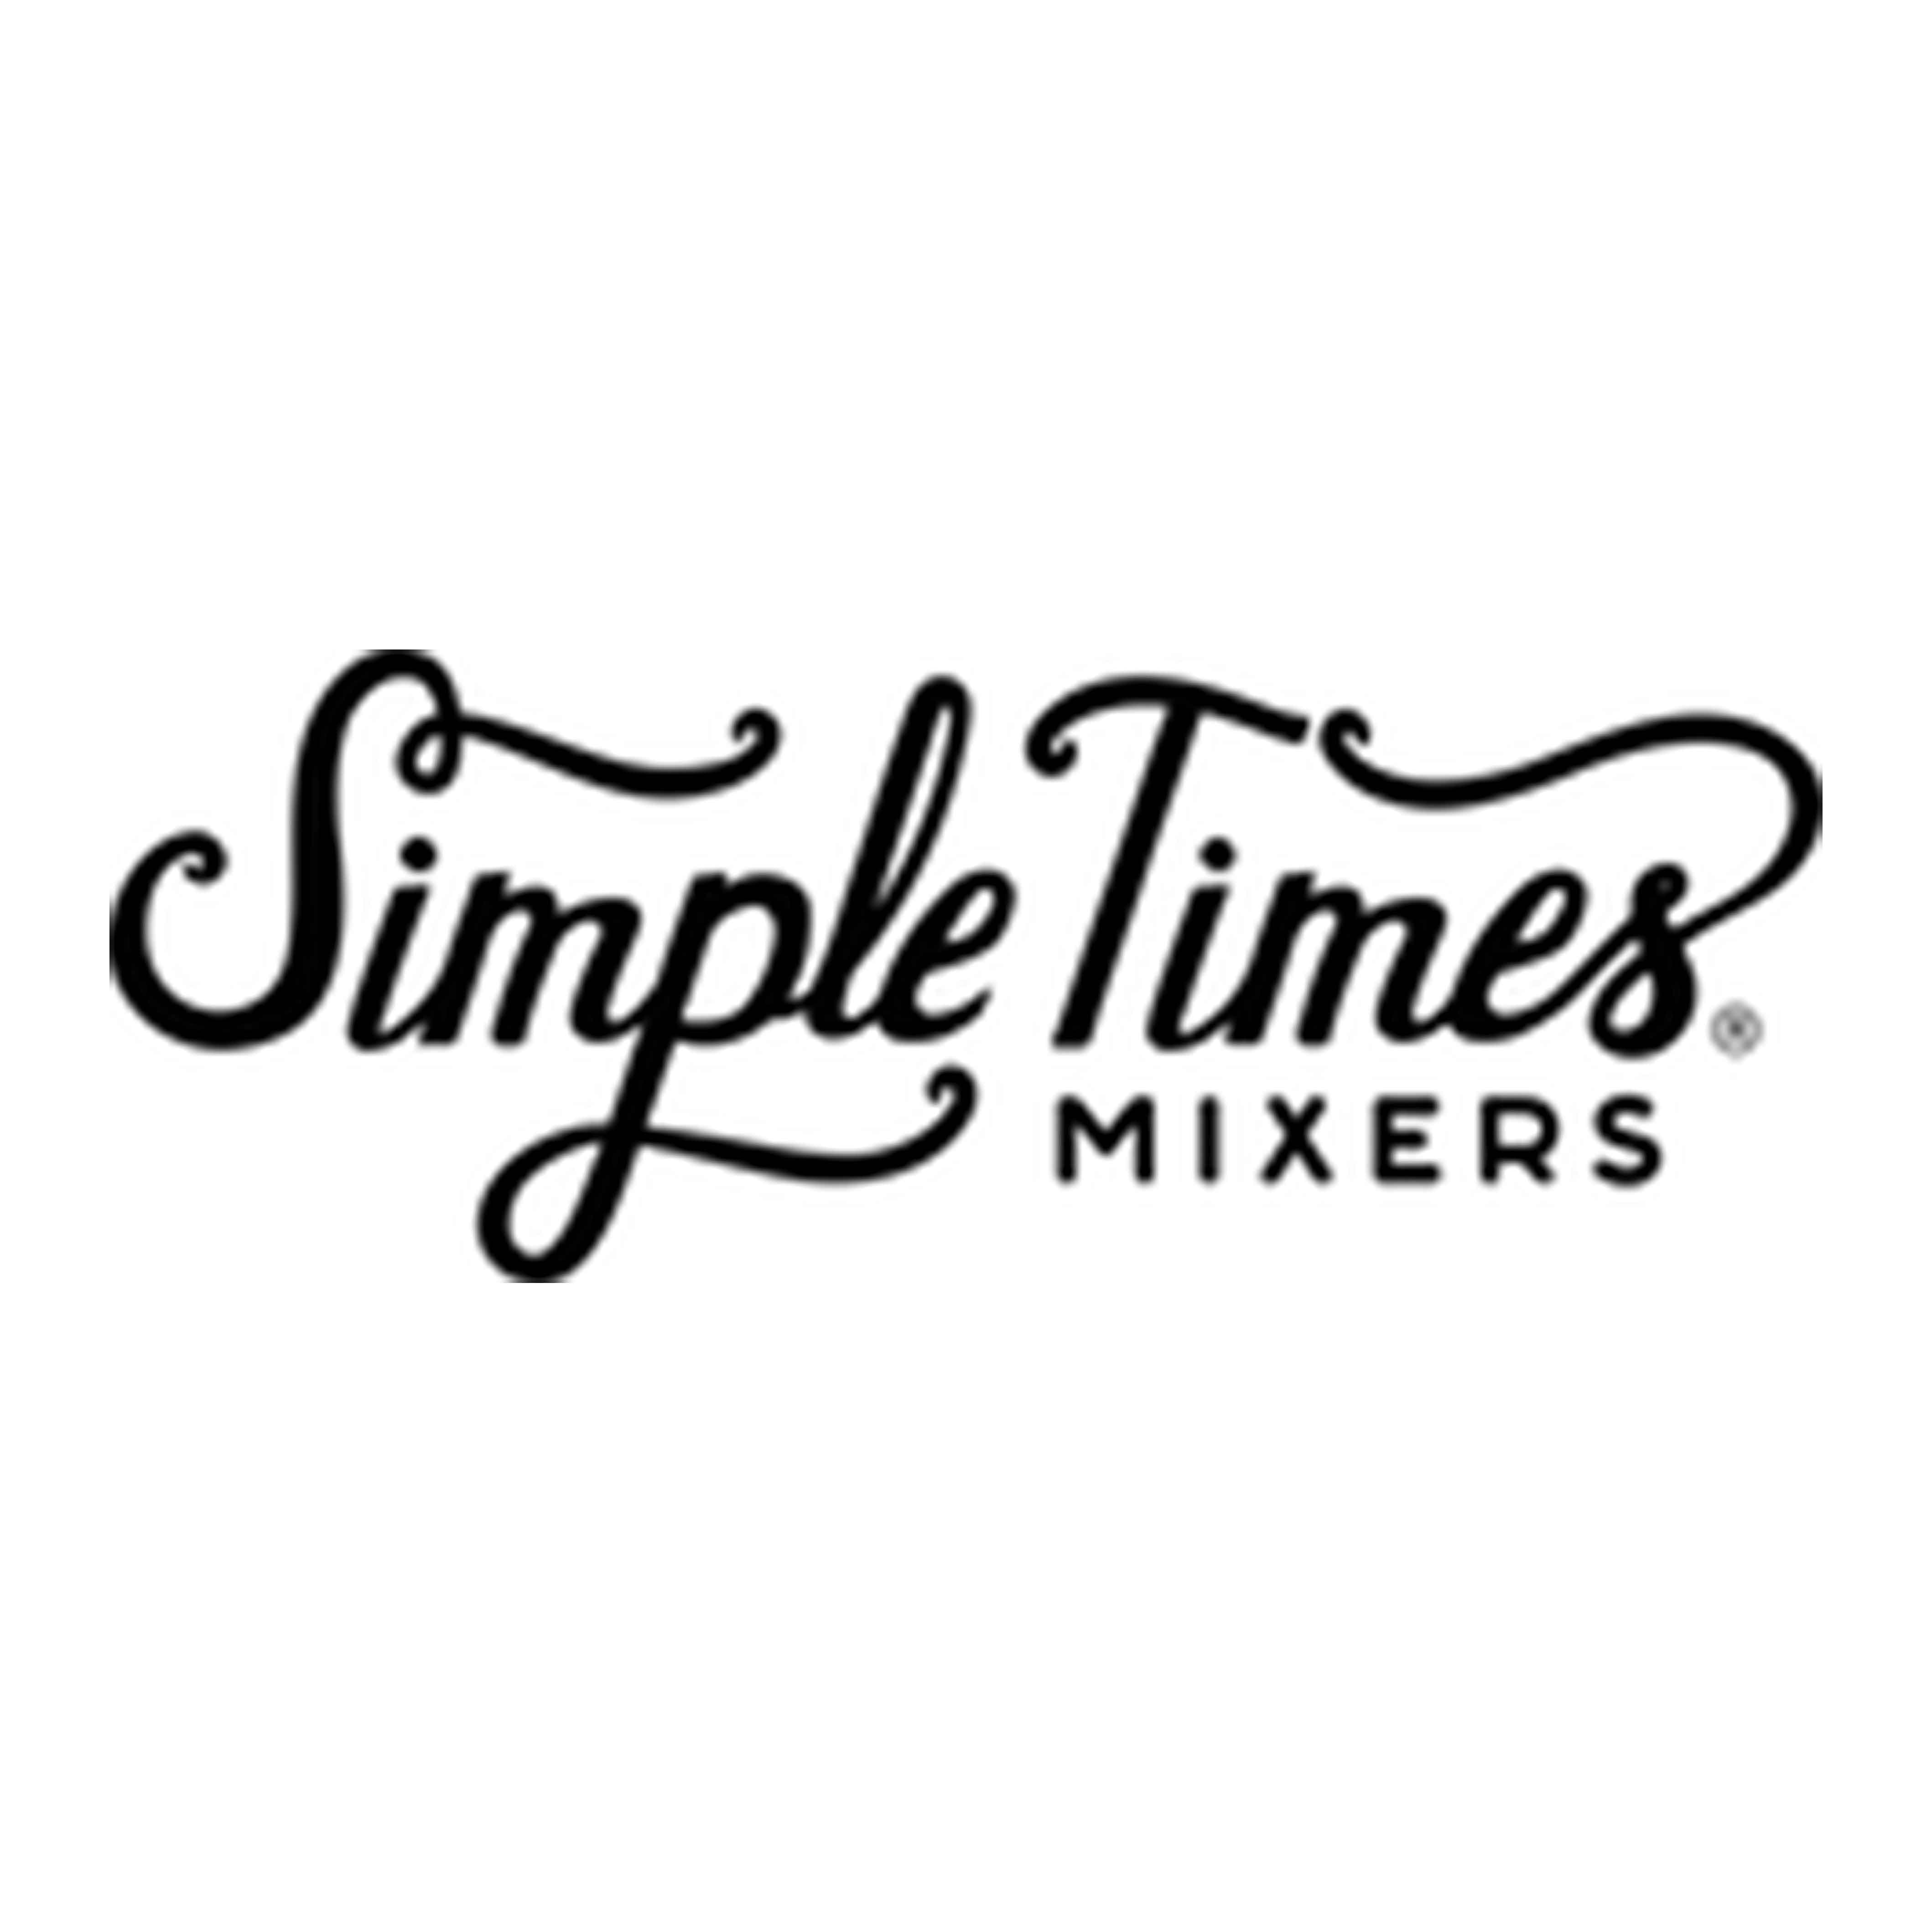 Simple Times Mixers